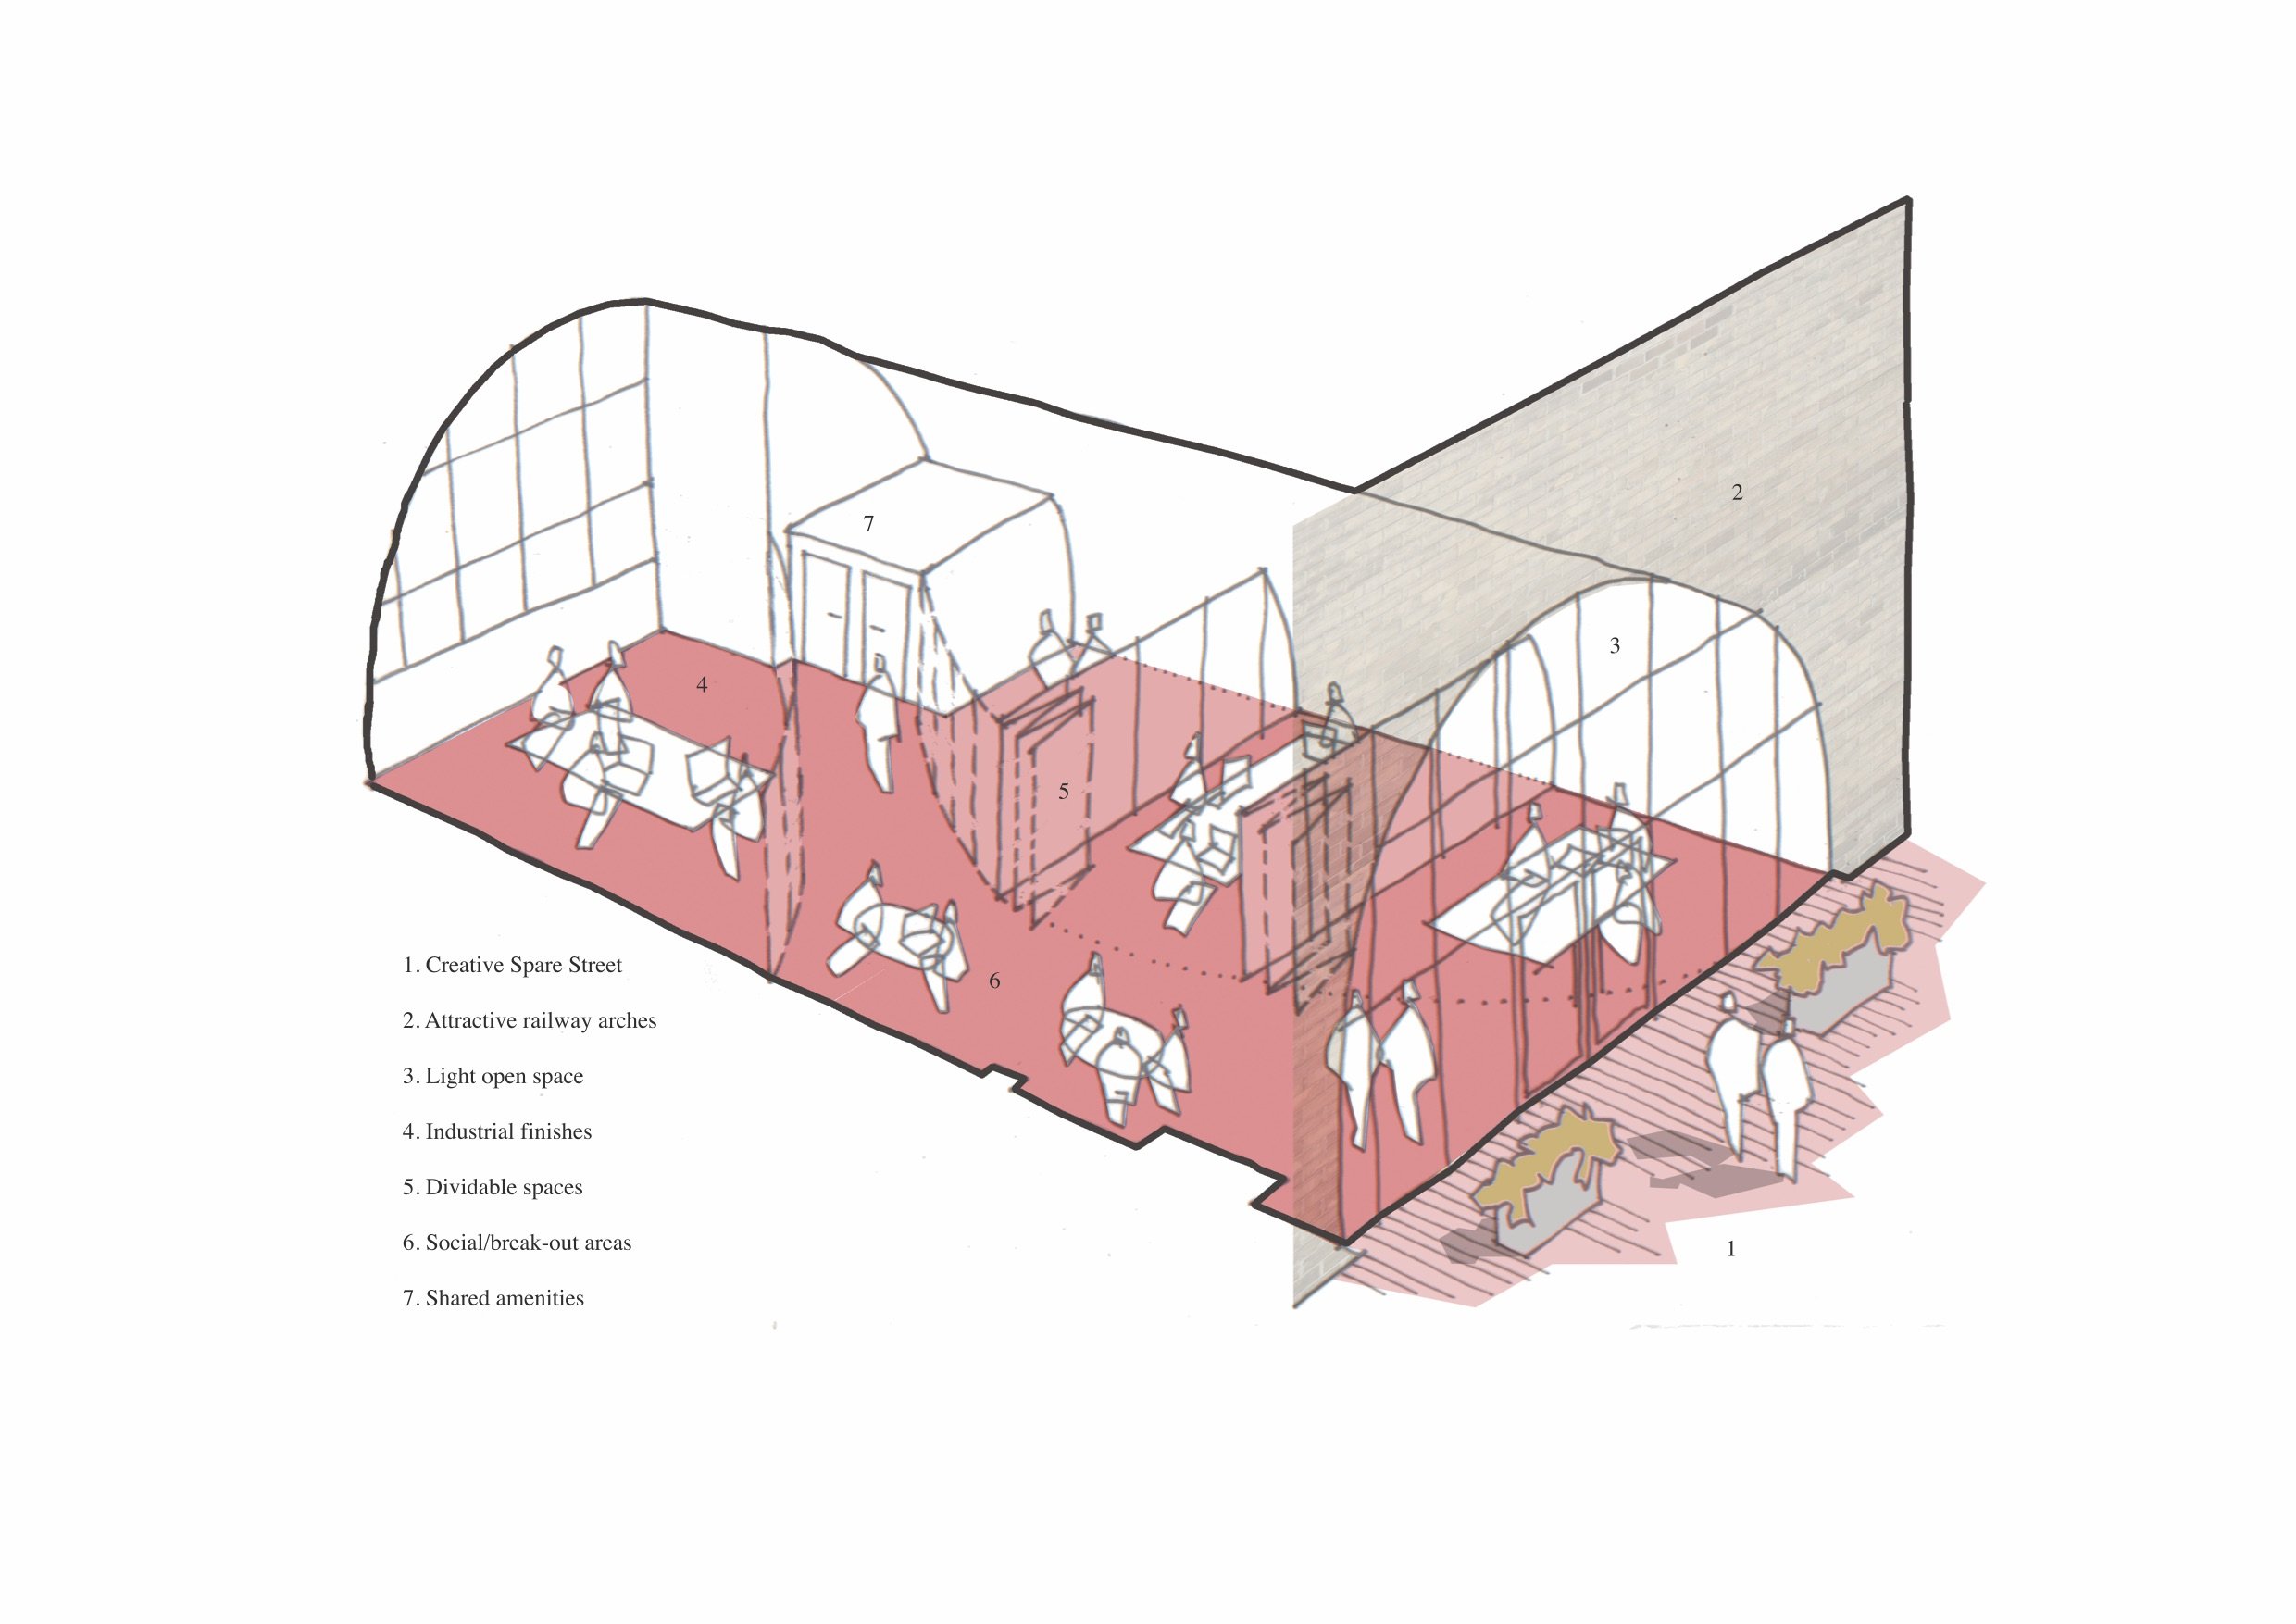 Hotel Elephant Spare Street - Co-working space illustration.jpg